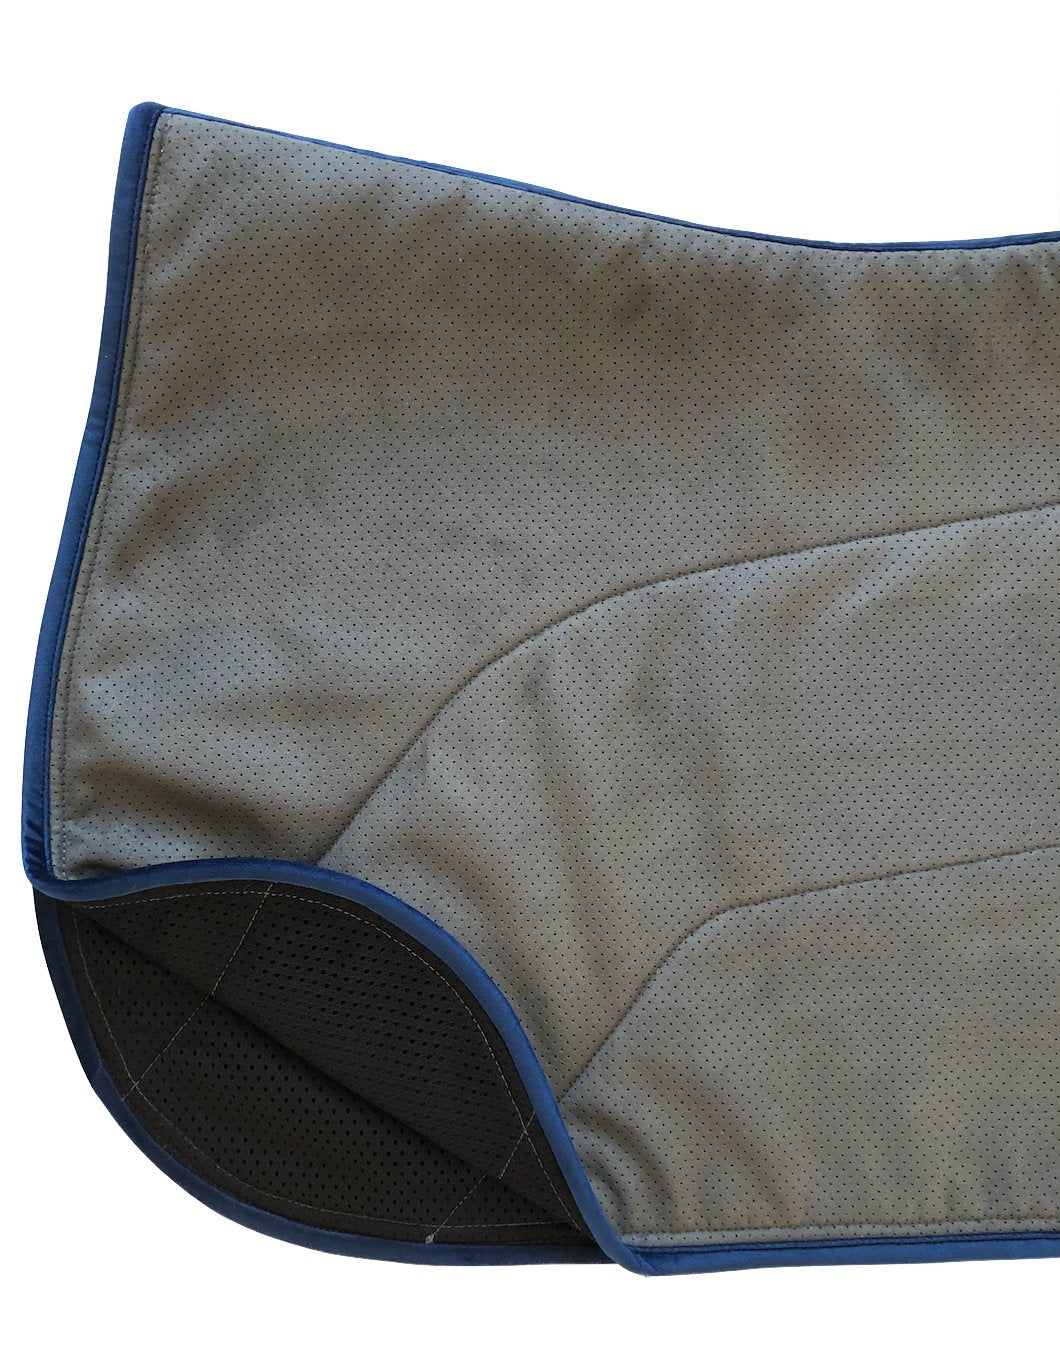 Anatomeq Perfeq Jumper Pad - Ultra Breathable Perforation - Equiluxe Tack